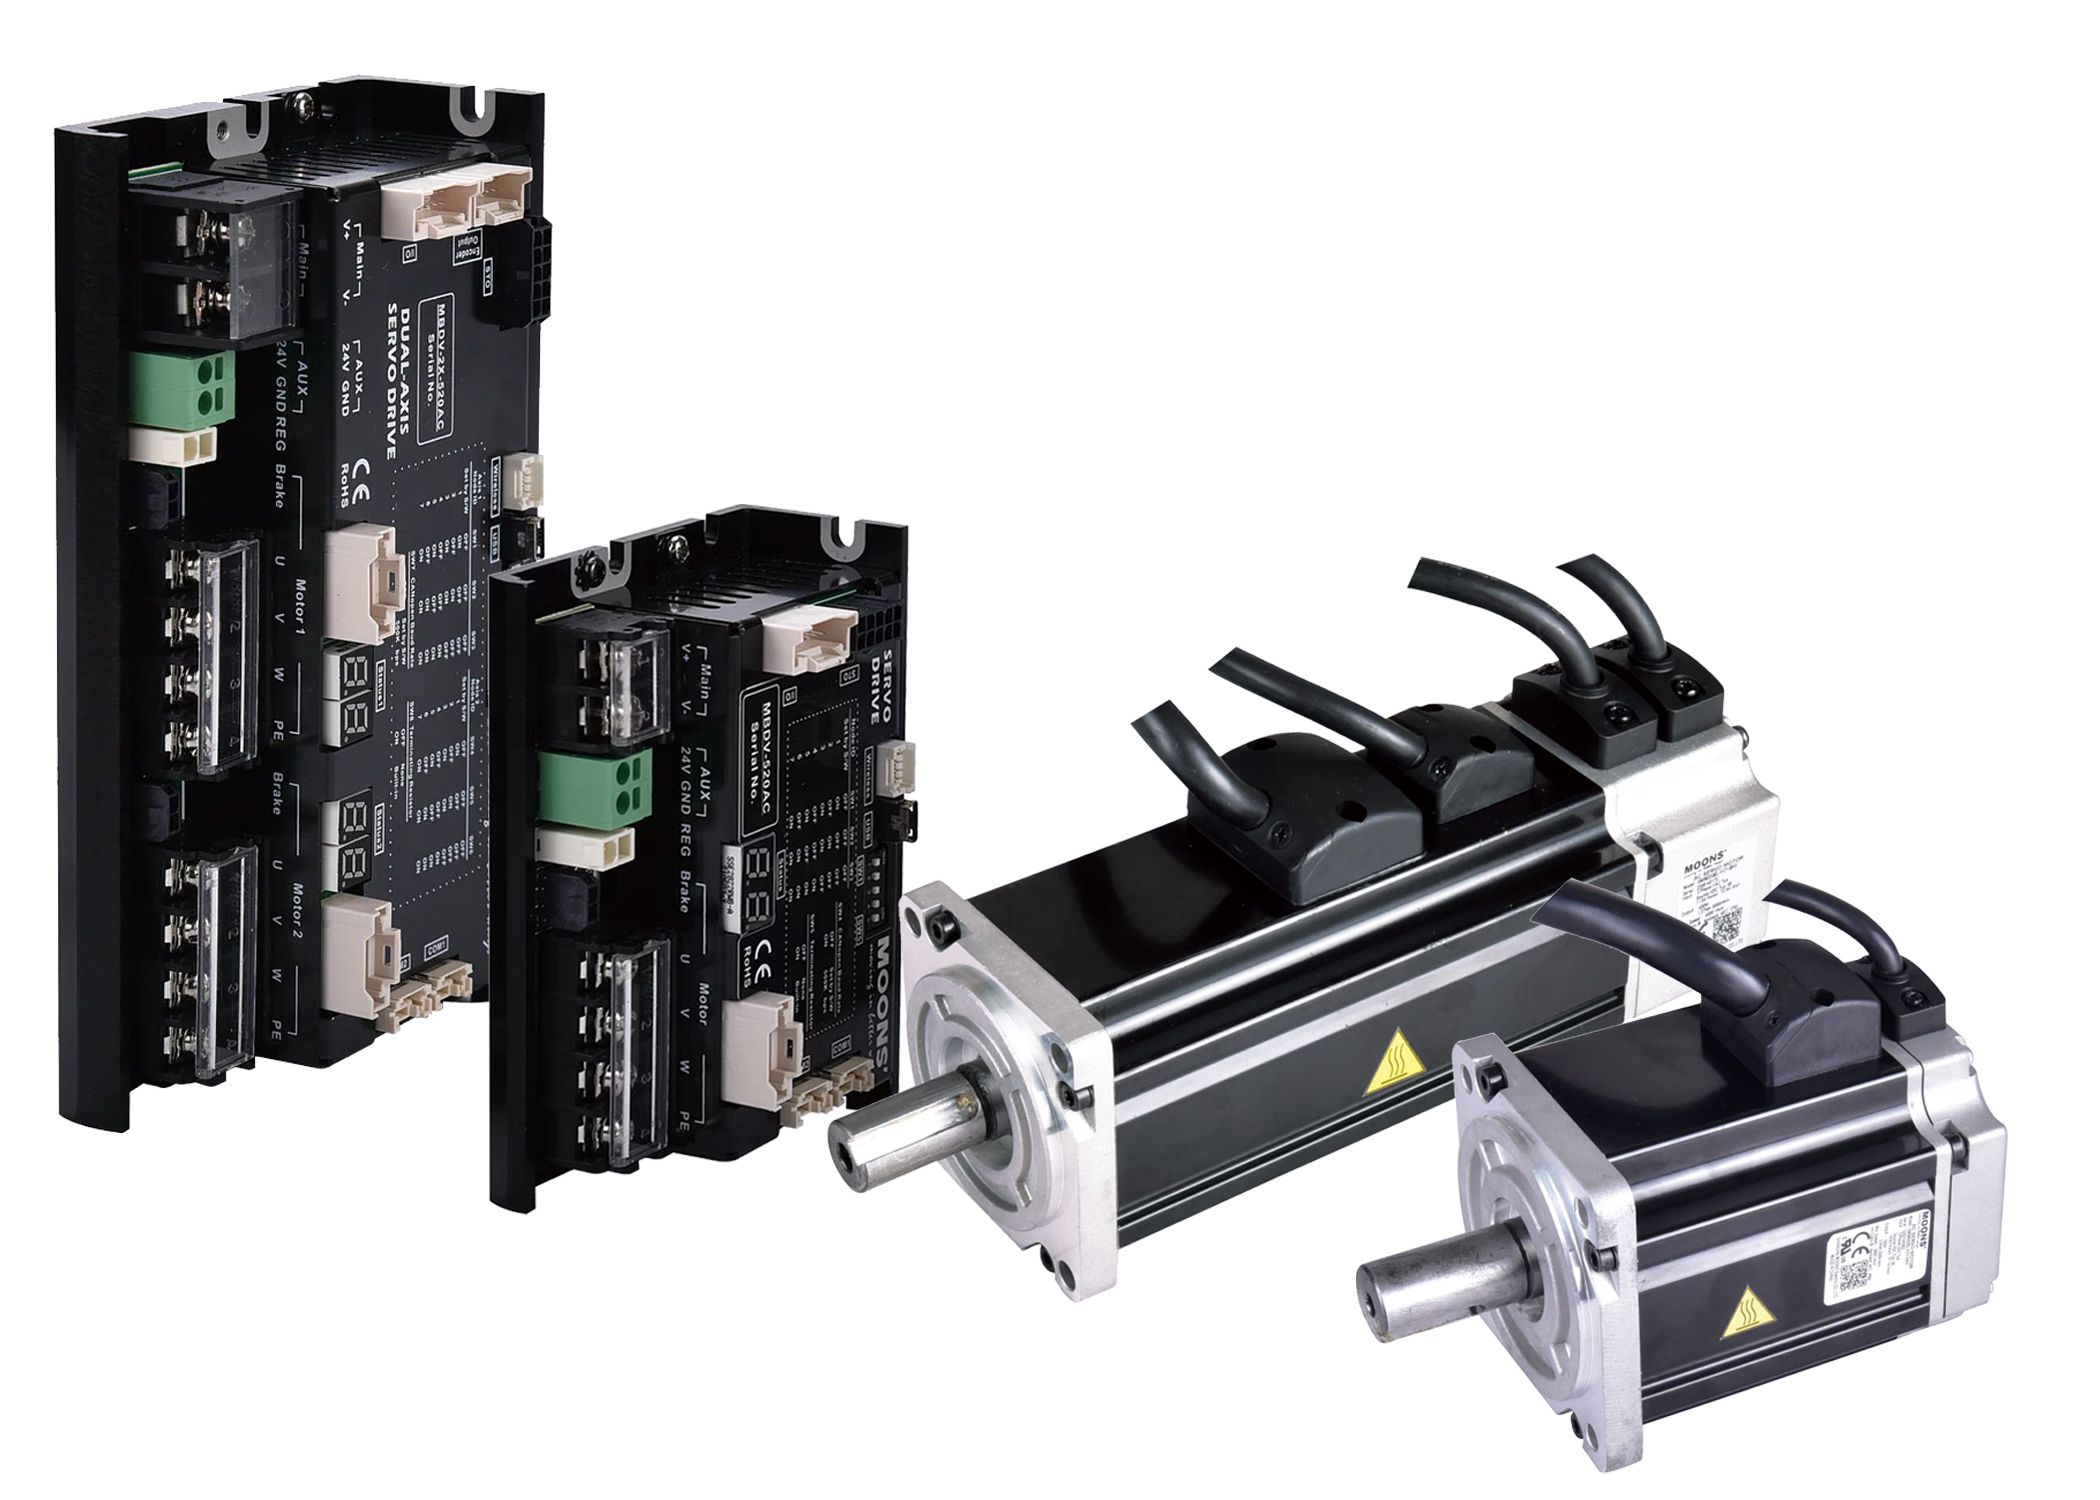 Applied Motion Products Inc. launches new servo drives, motors and more for AGV and AMR applications – available from Mclennan